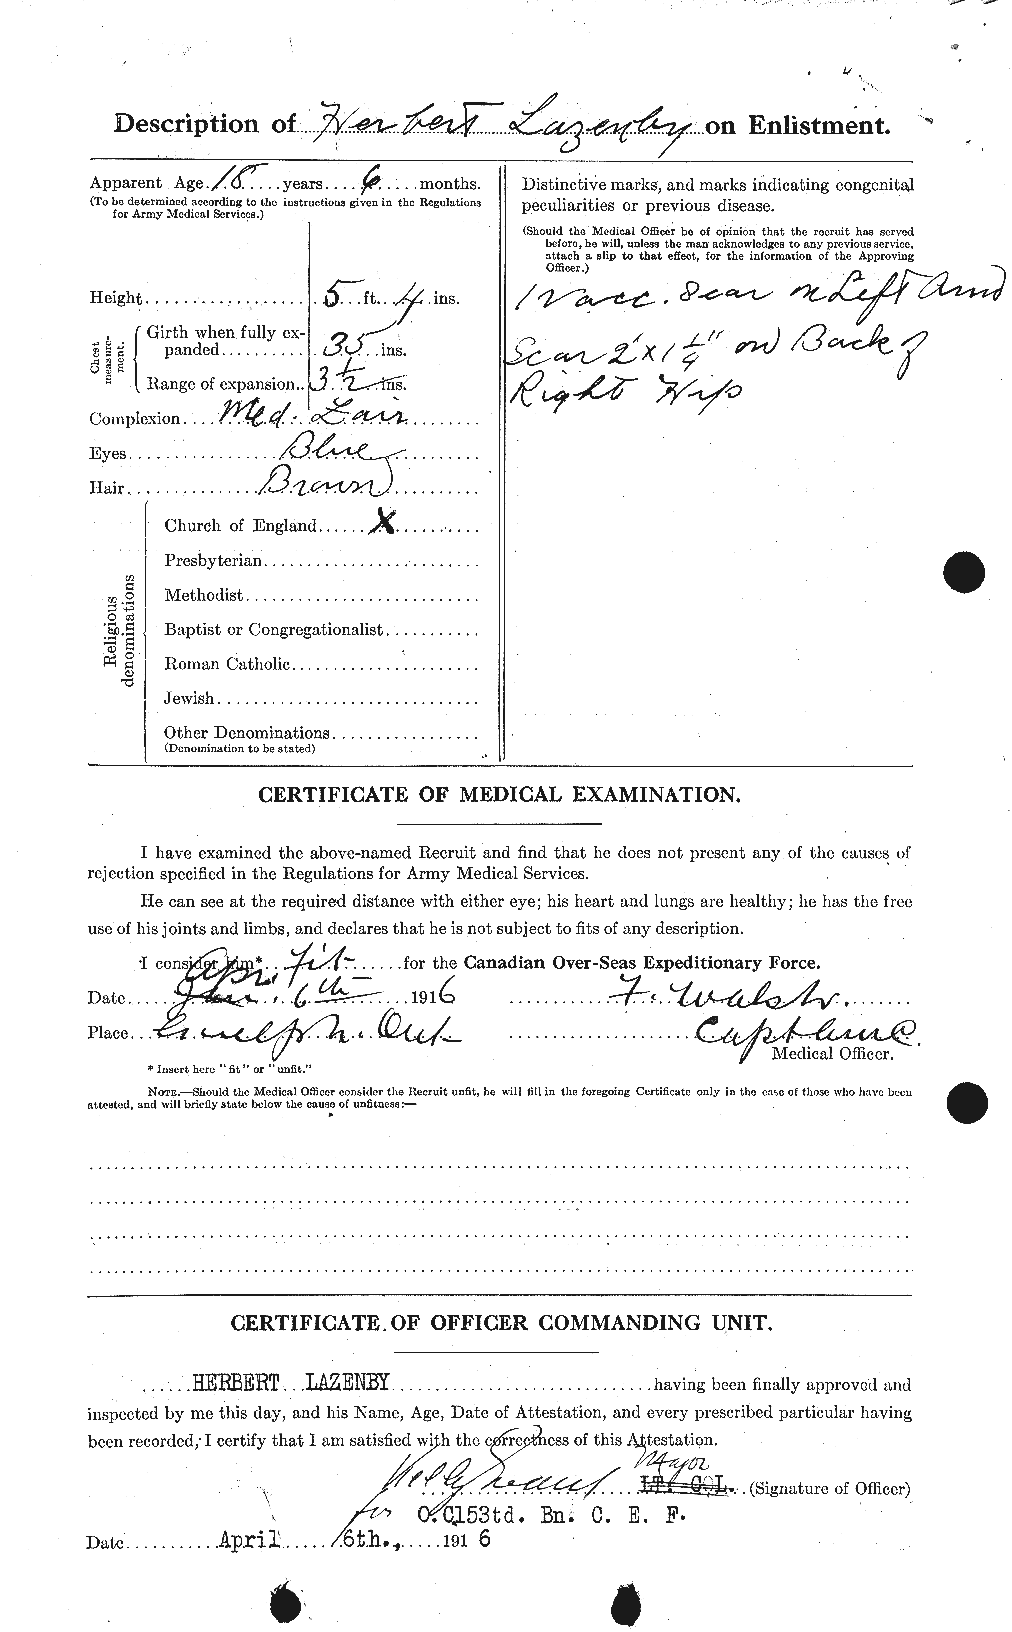 Personnel Records of the First World War - CEF 453206b